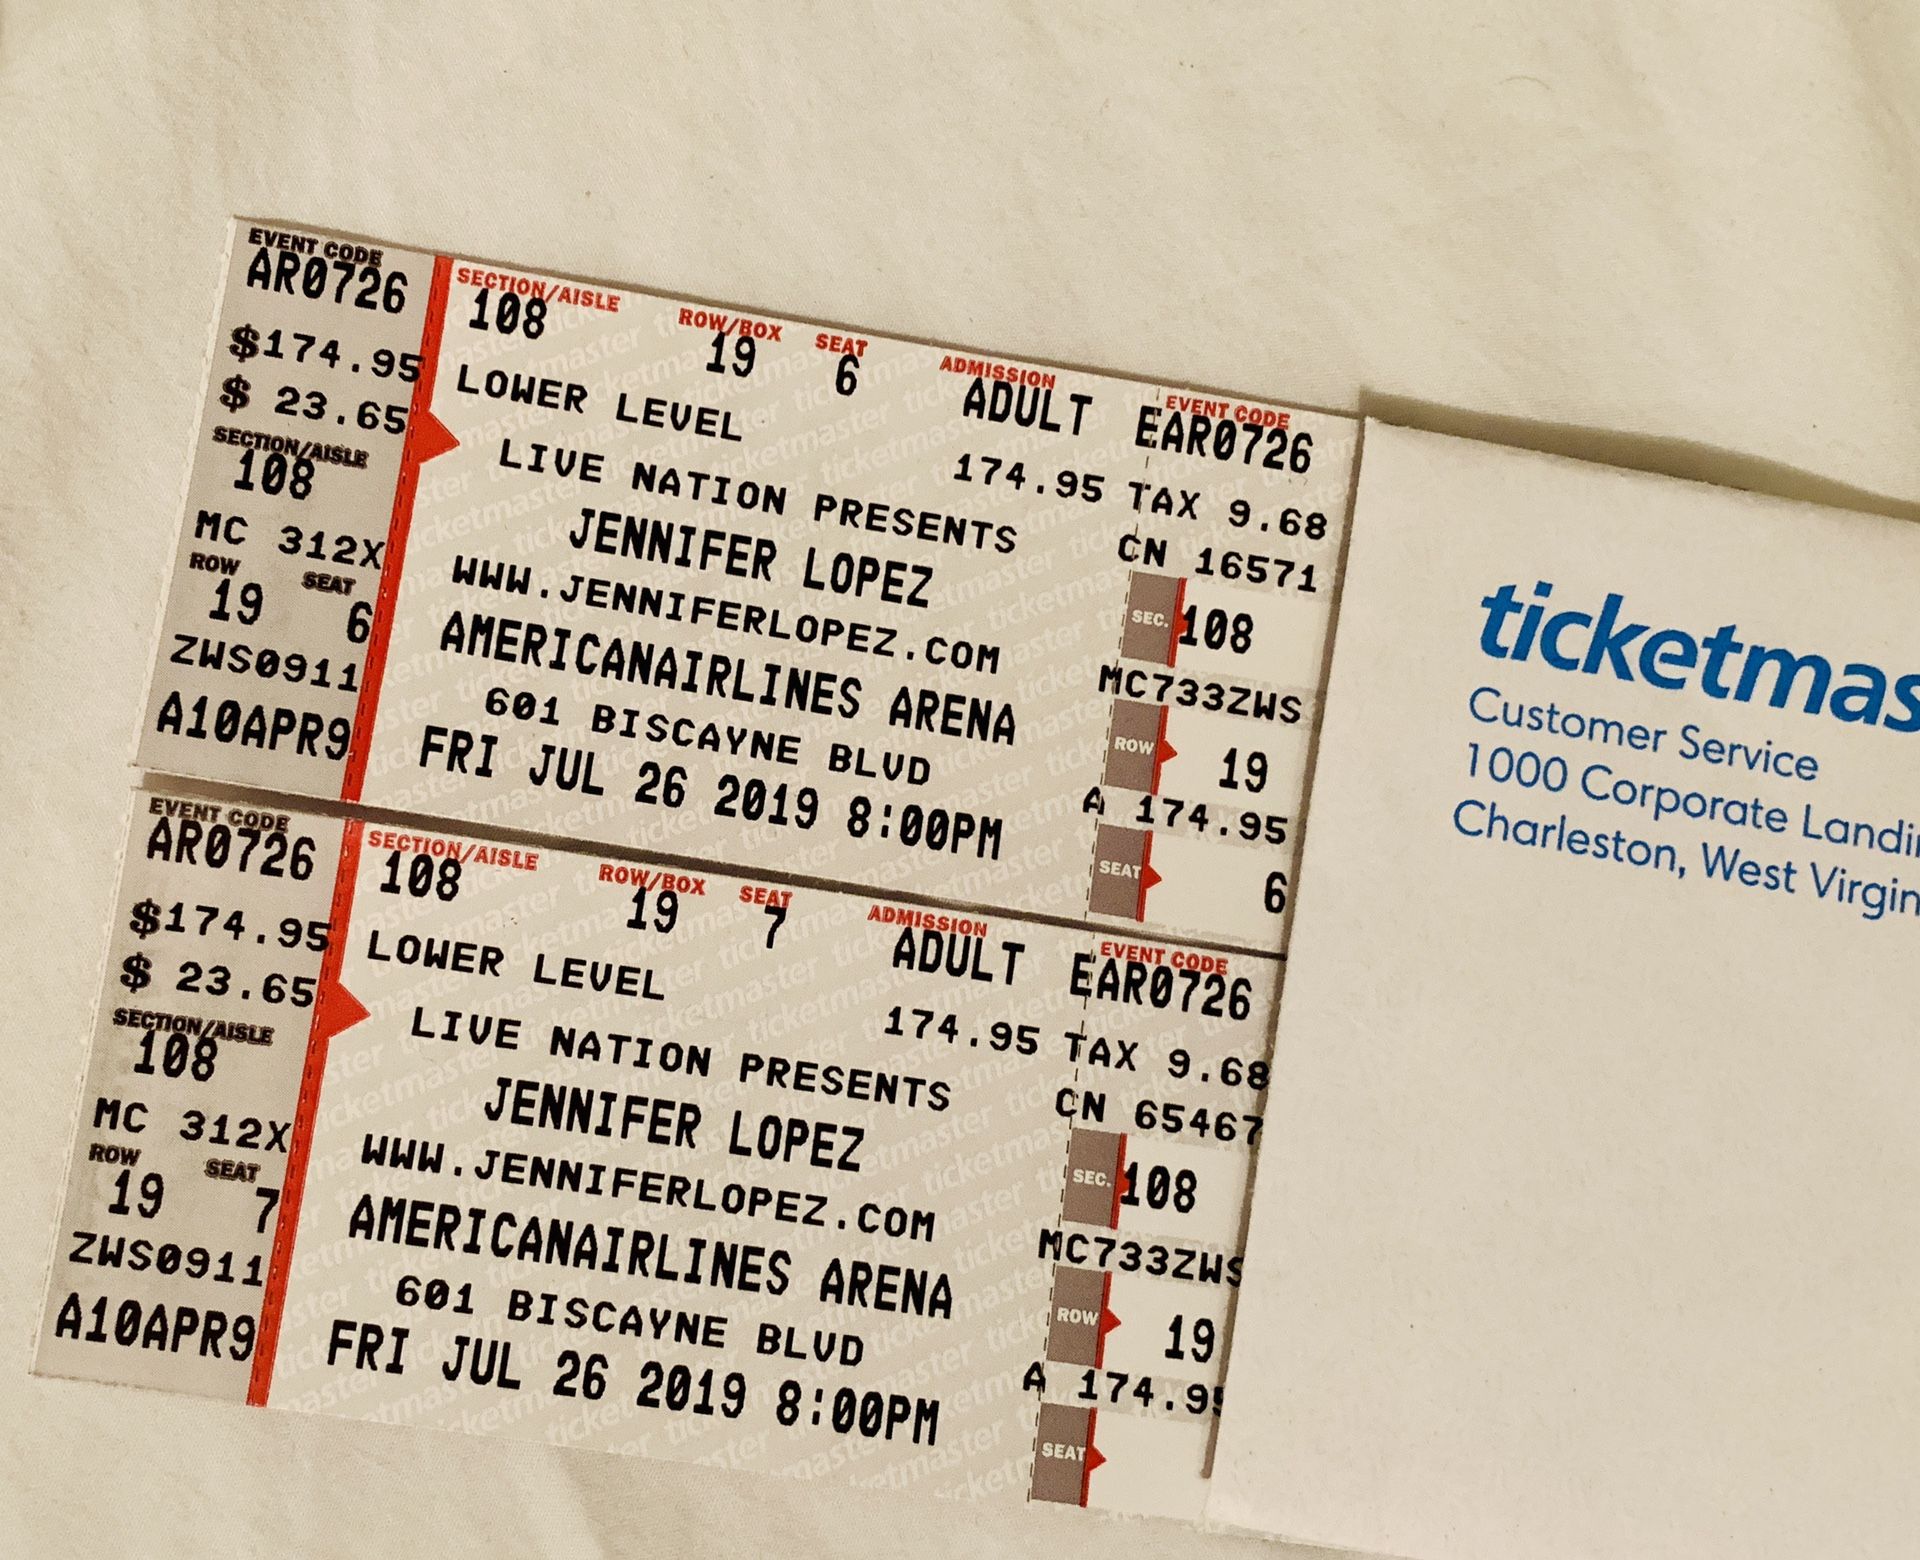 2 Jennifer Lopez lower level Concert tickets Friday July 26 Section 108 Row 19 Seat 6 & 7